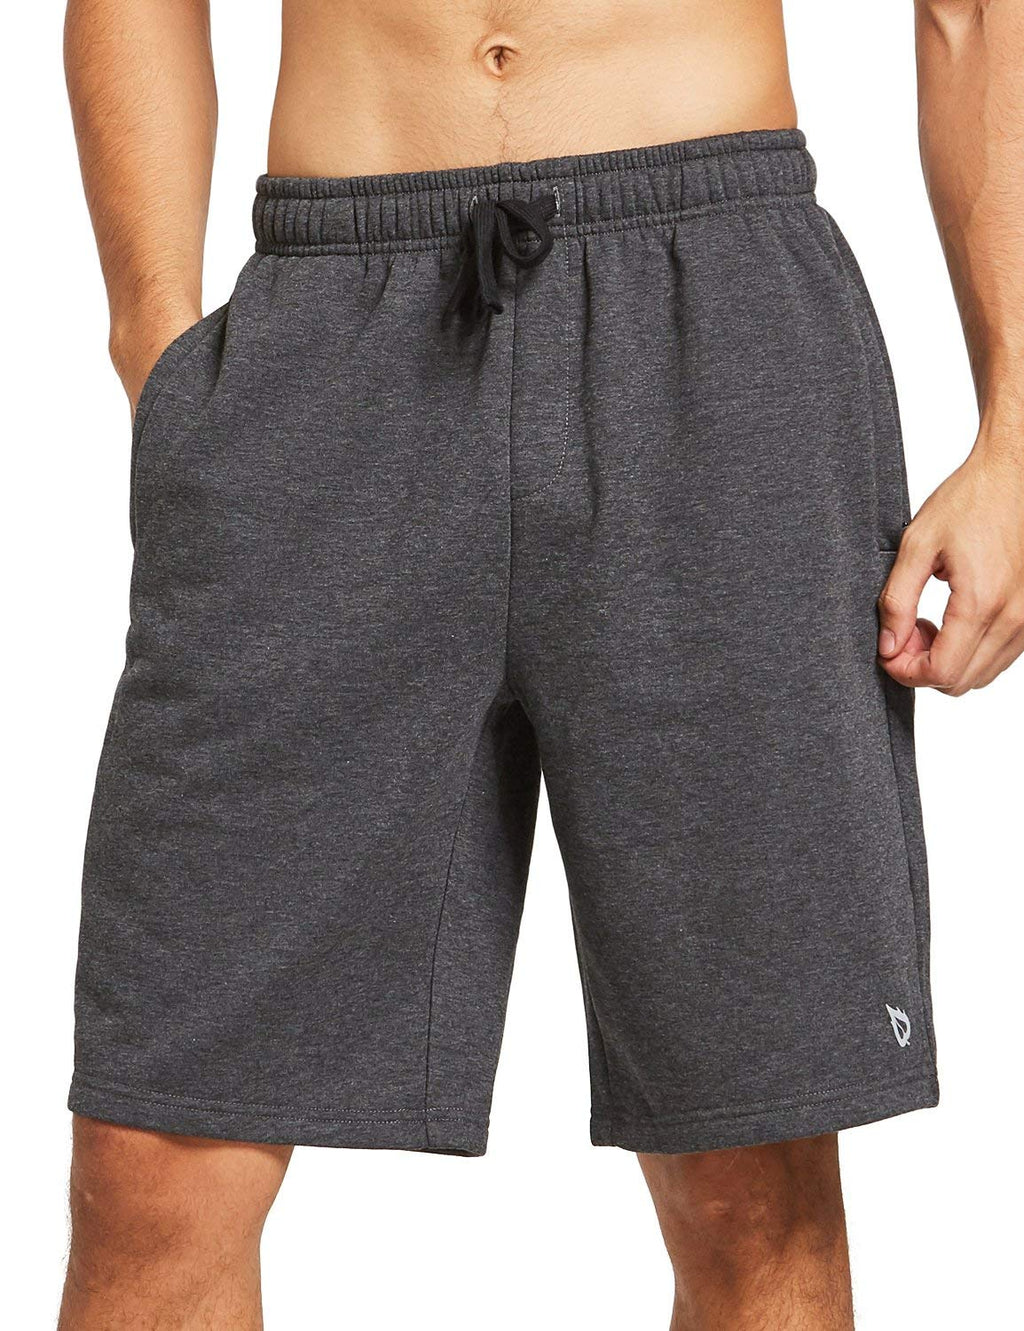 [AUSTRALIA] - BALEAF Men's Fleece Gym Shorts Cotton 9 Inches with Zipper Pockets for Home Fitness Jogger Casual Charcoal Medium 